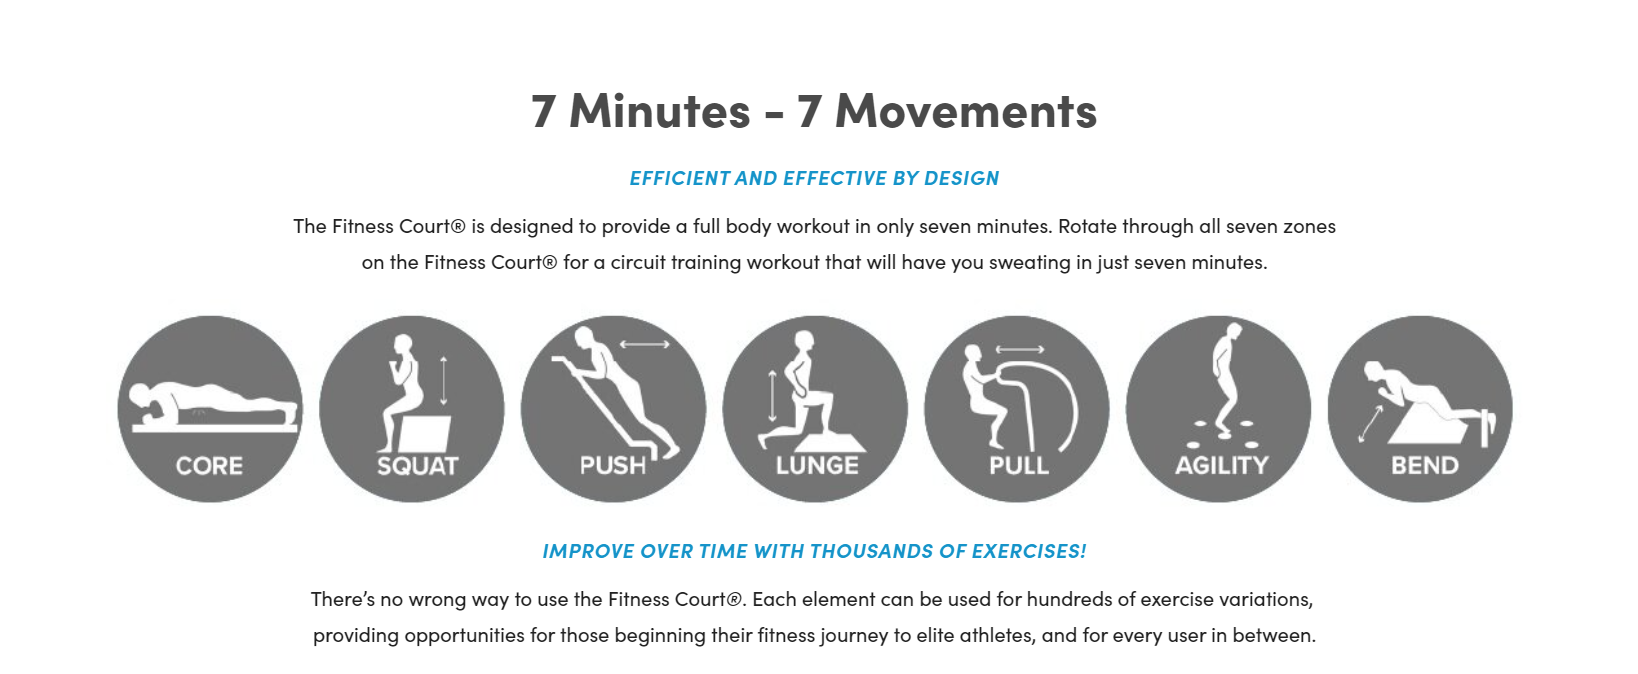 7 MINUTES 7 MOVEMENTS IT ONLY TAKES 7 MINUTES TO CHANGE YOUR HEALTH